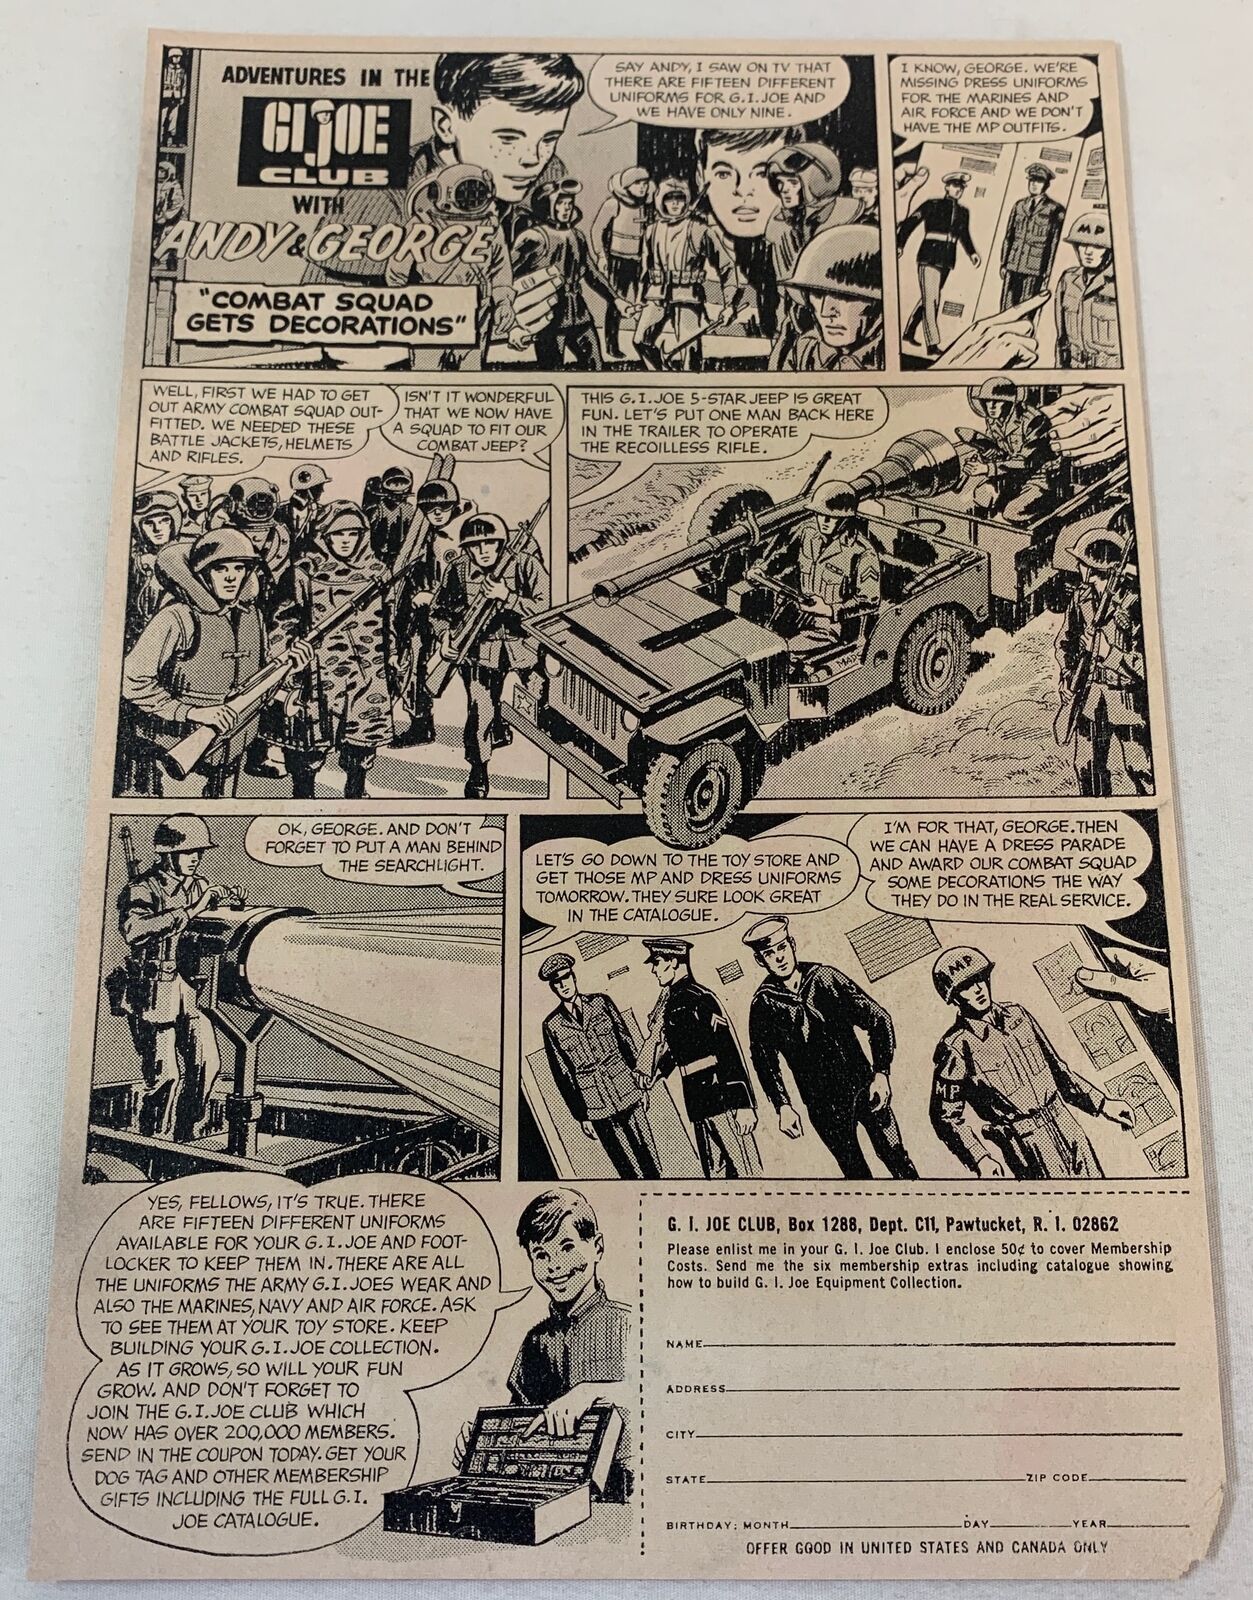 1966 GI JOE ad page ~ ANDY & GEORGE ~ Combat Squad Gets Decorations